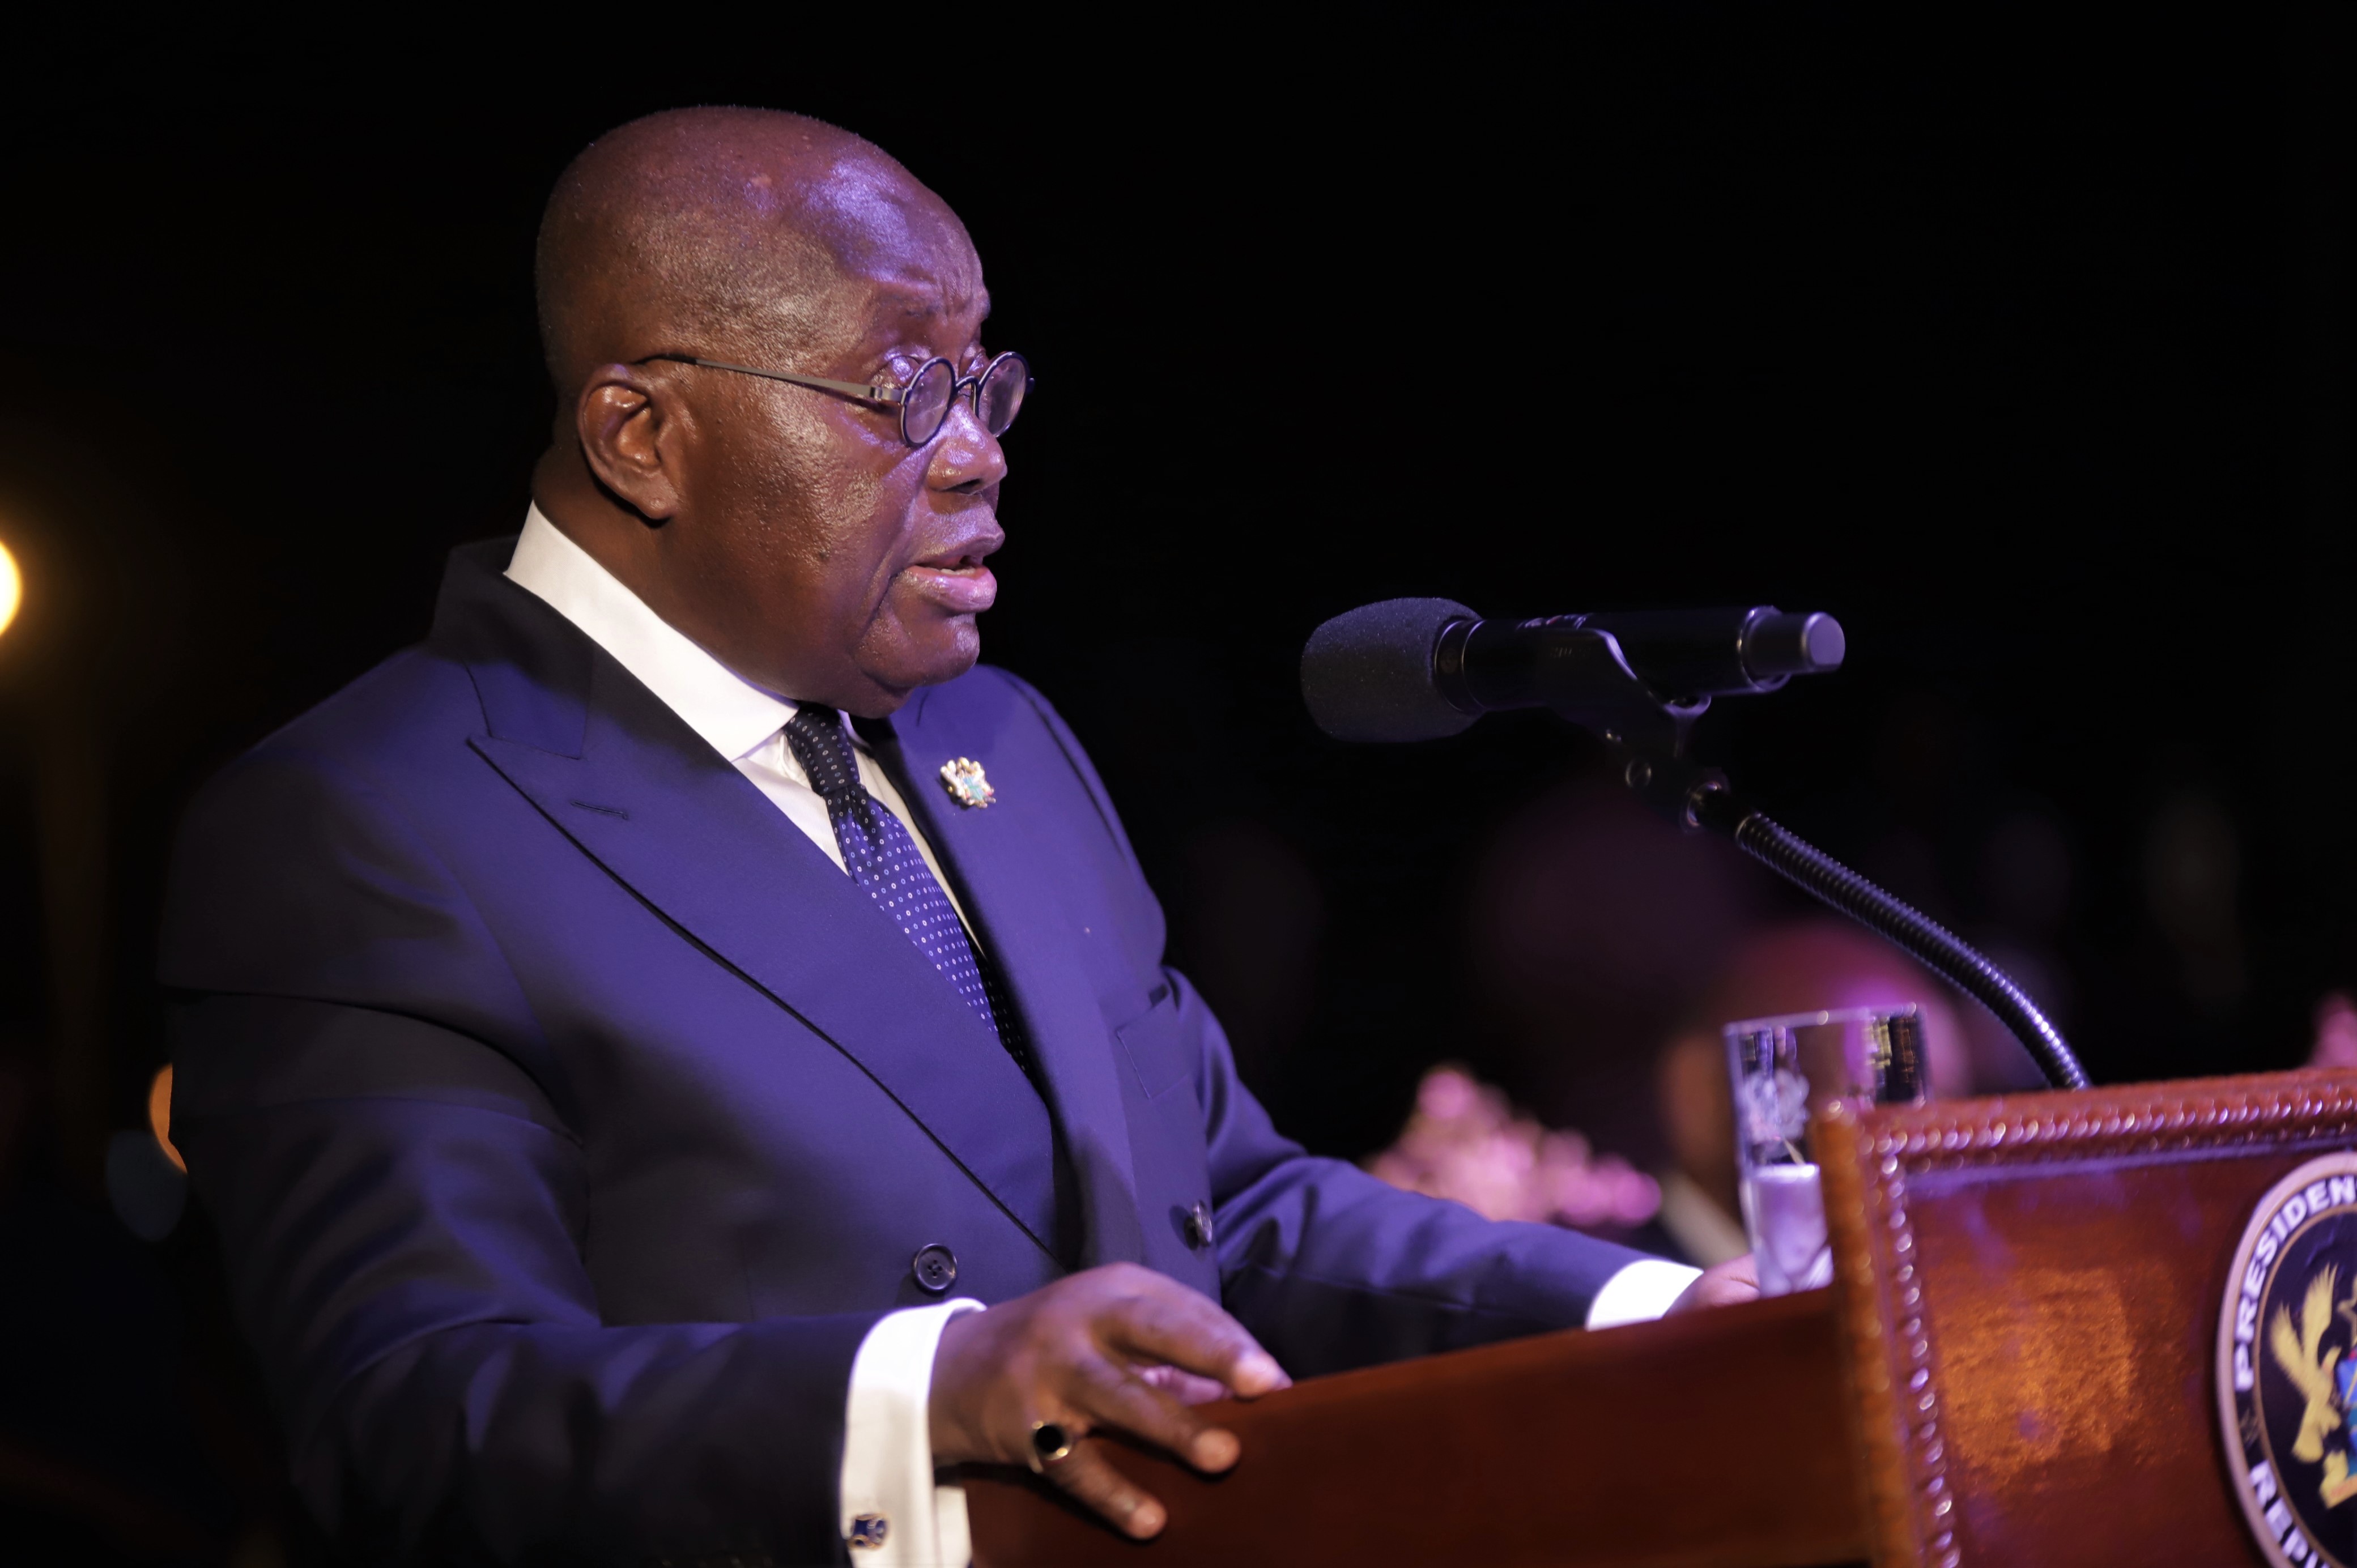 President Akufo-Addo addressing diplomats and other guests at the event